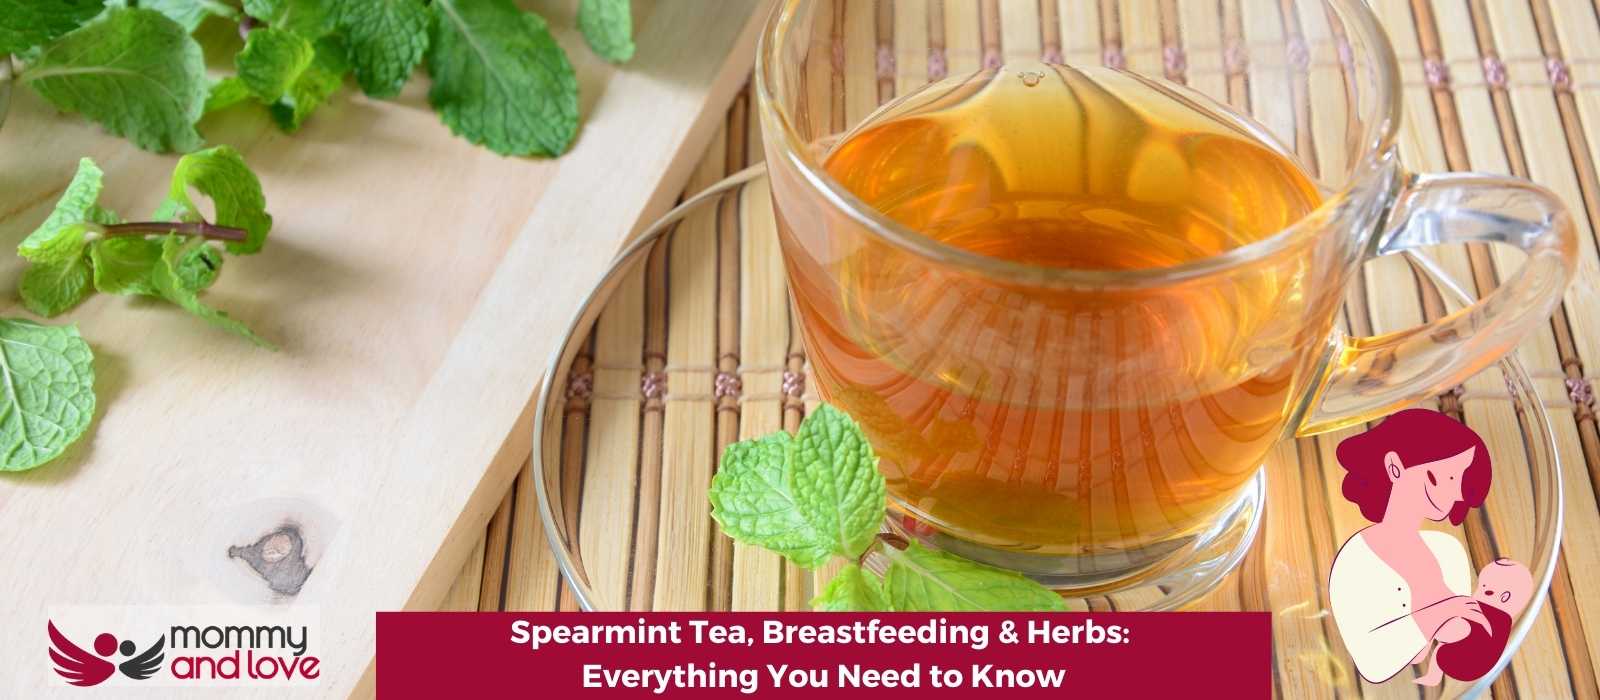 Spearmint Tea, Breastfeeding & Herbs: Everything You Need to Know